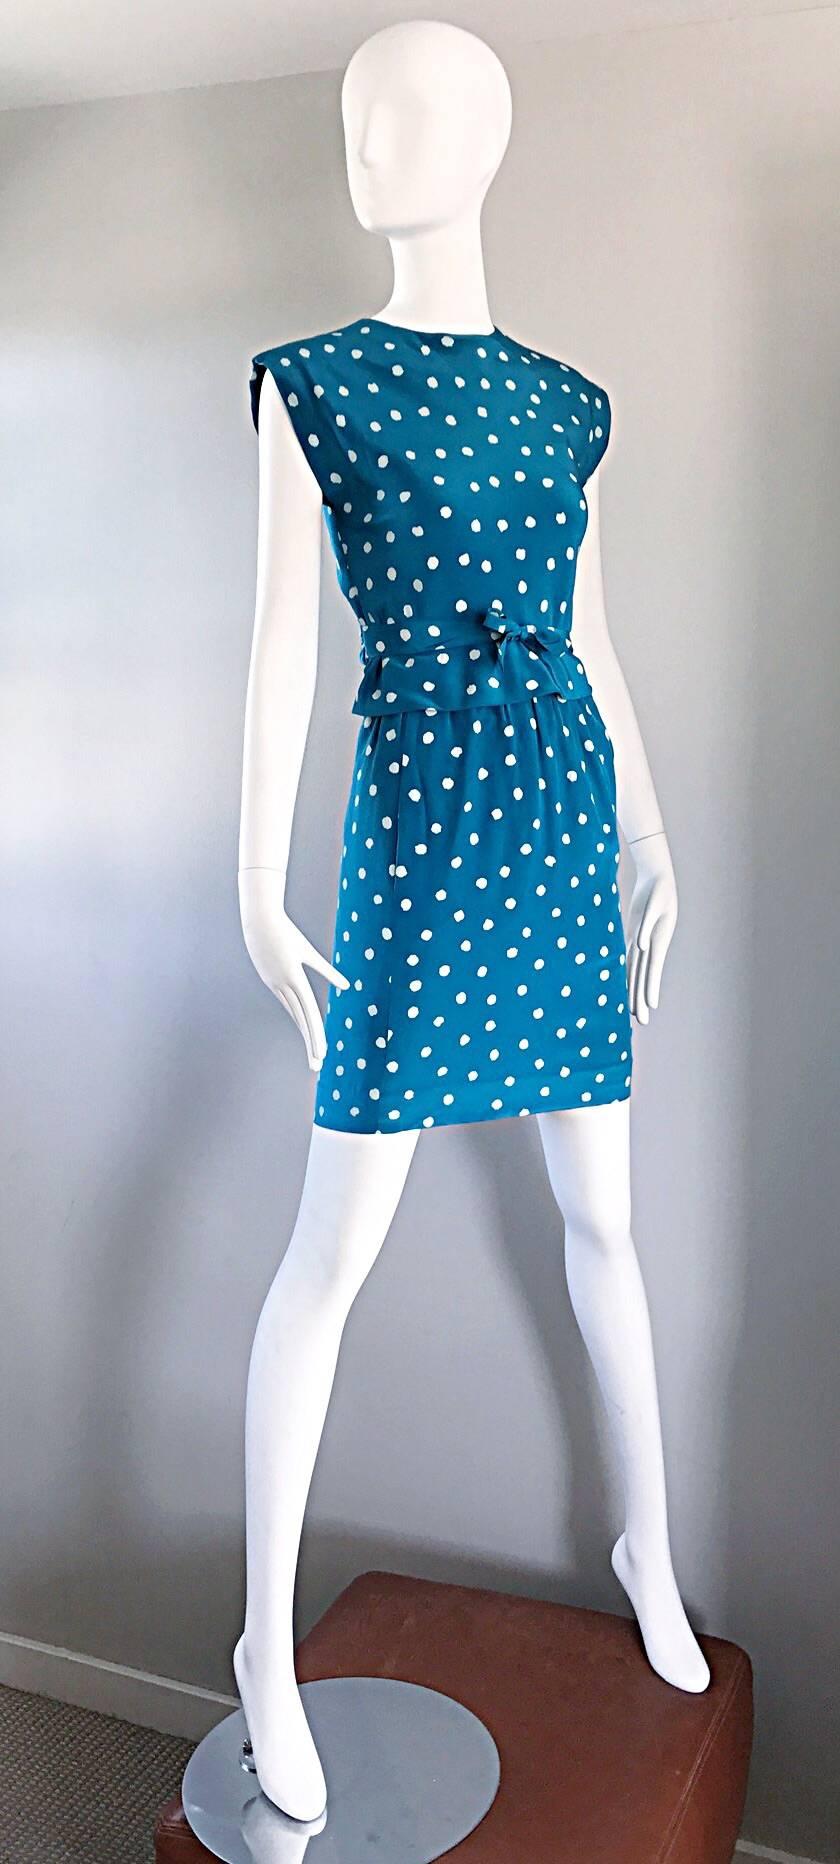 Vintage Oscar de la Renta Bright Blue and White Polka Dot Dress Ensemble Size 4 In Excellent Condition For Sale In San Diego, CA